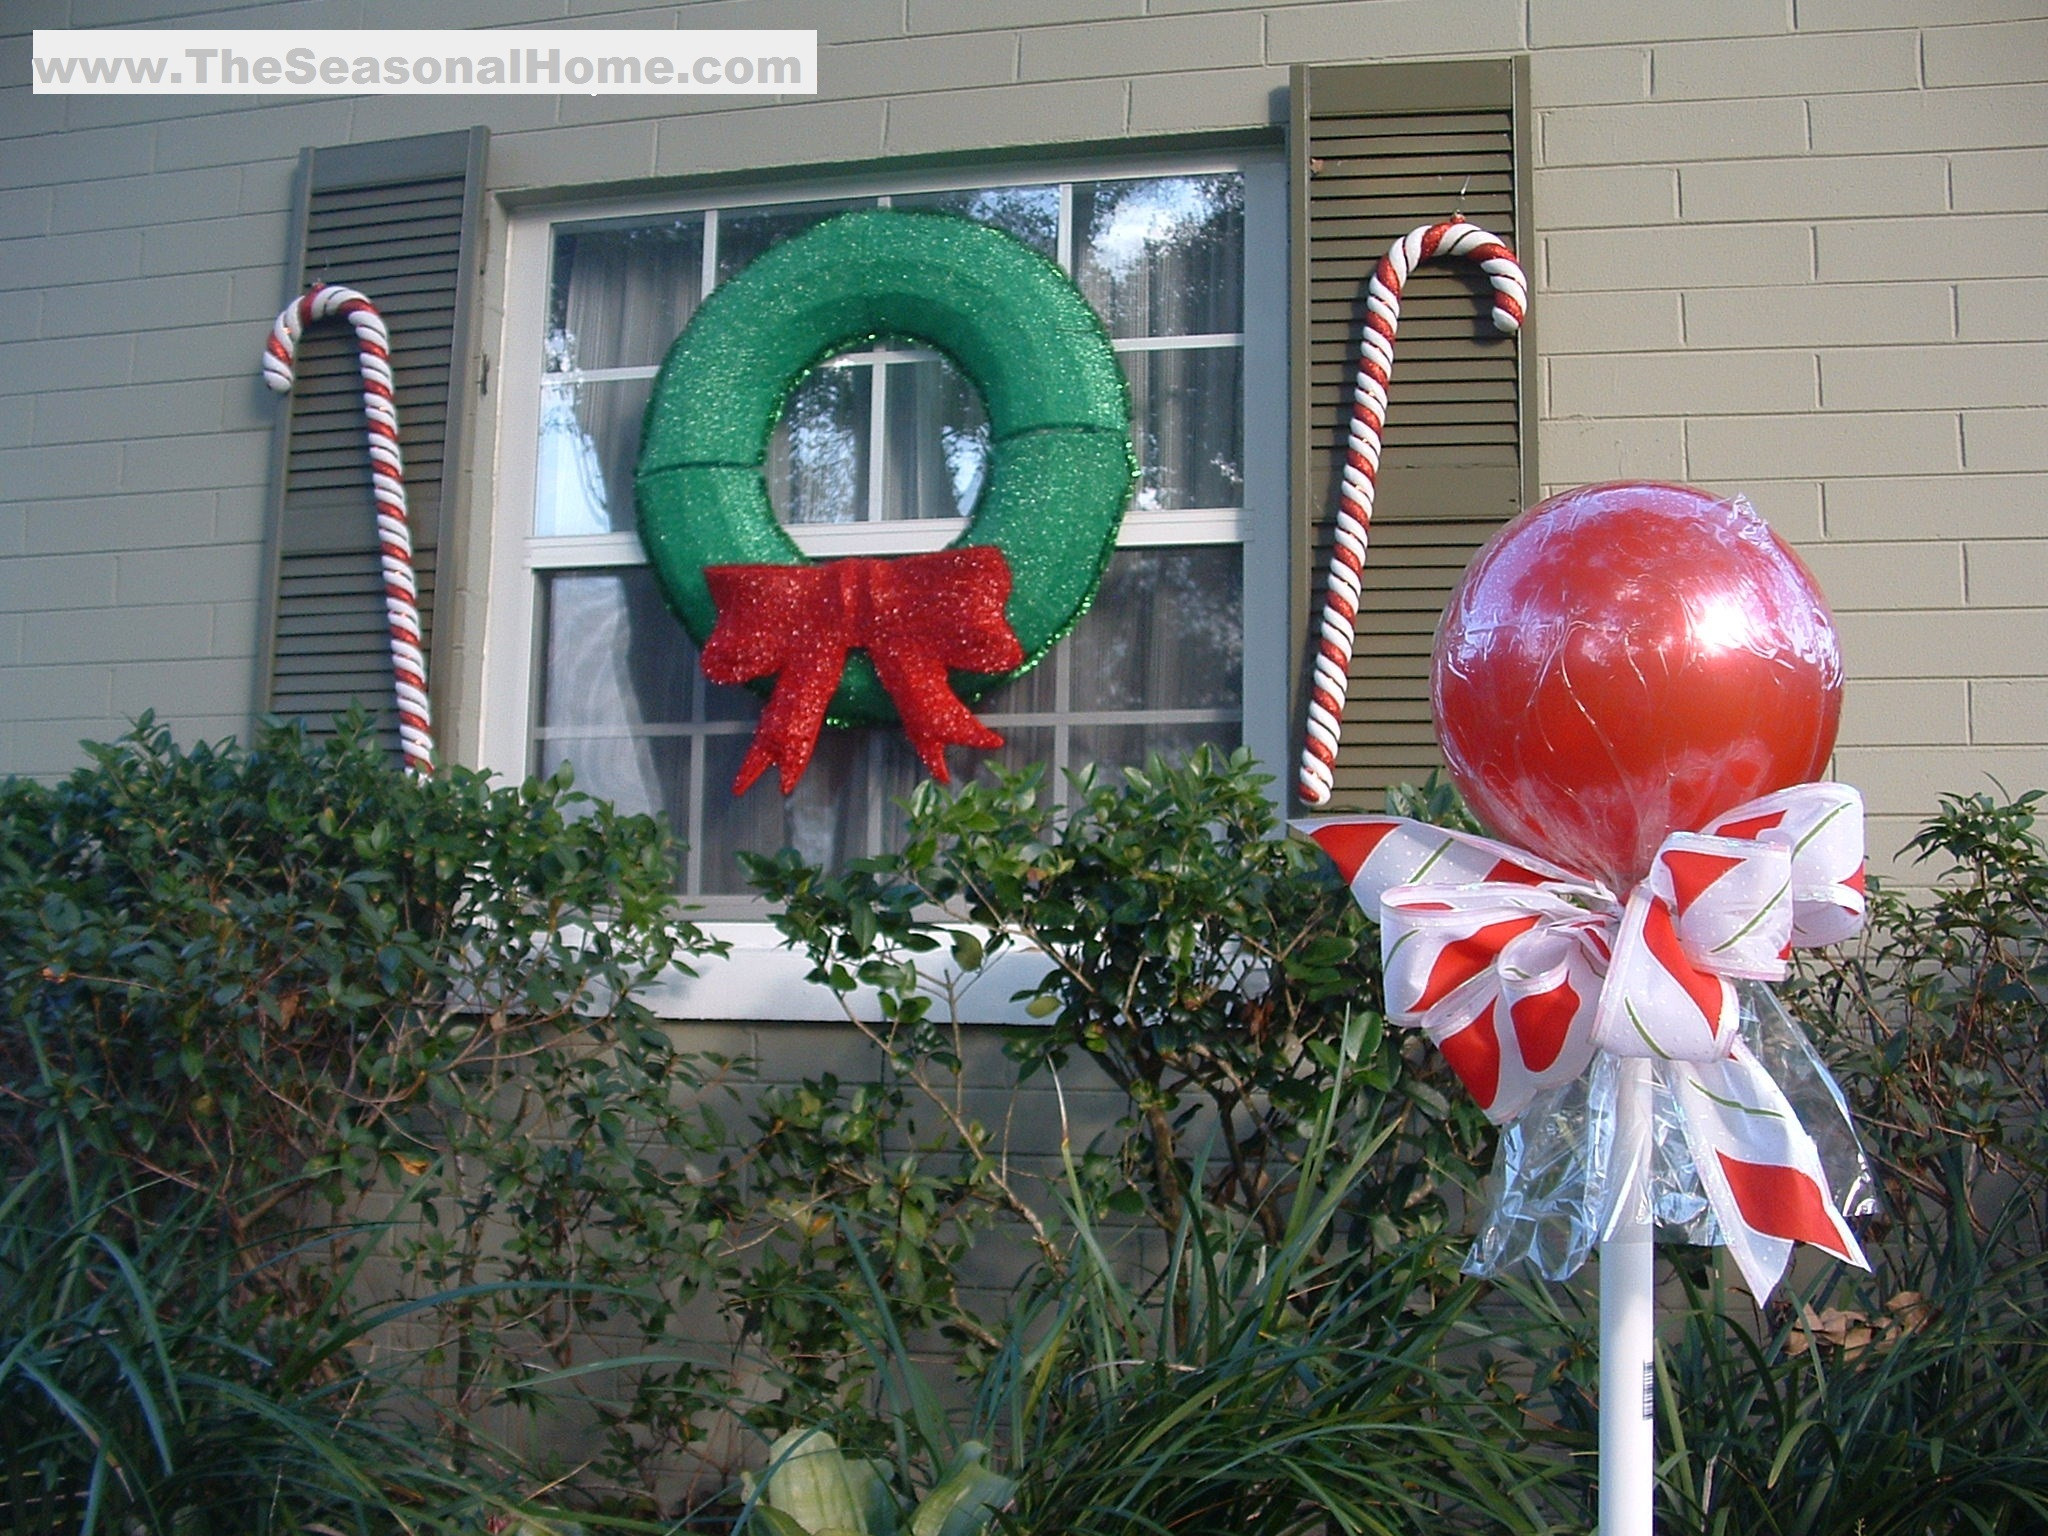 Candy Cane Outdoor Christmas Decorations
 Outdoor “CANDY” A Christmas Decorating Idea The